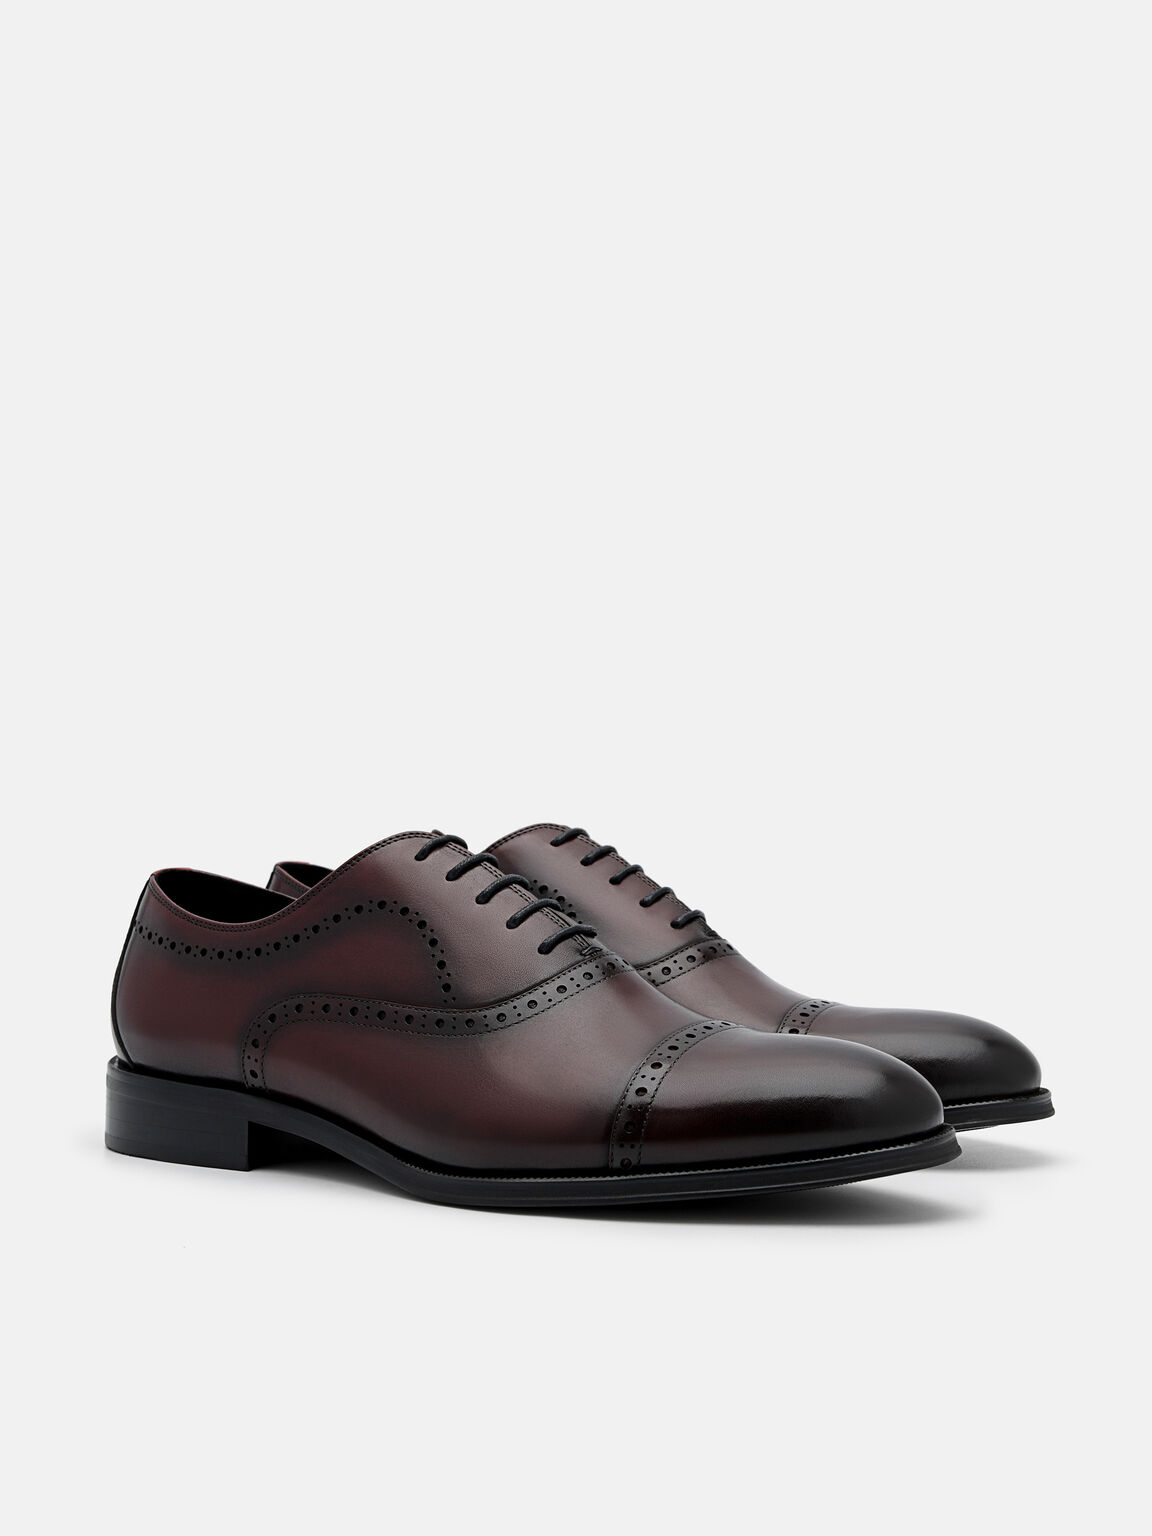 Leather Brogue Oxford Shoes, Wine